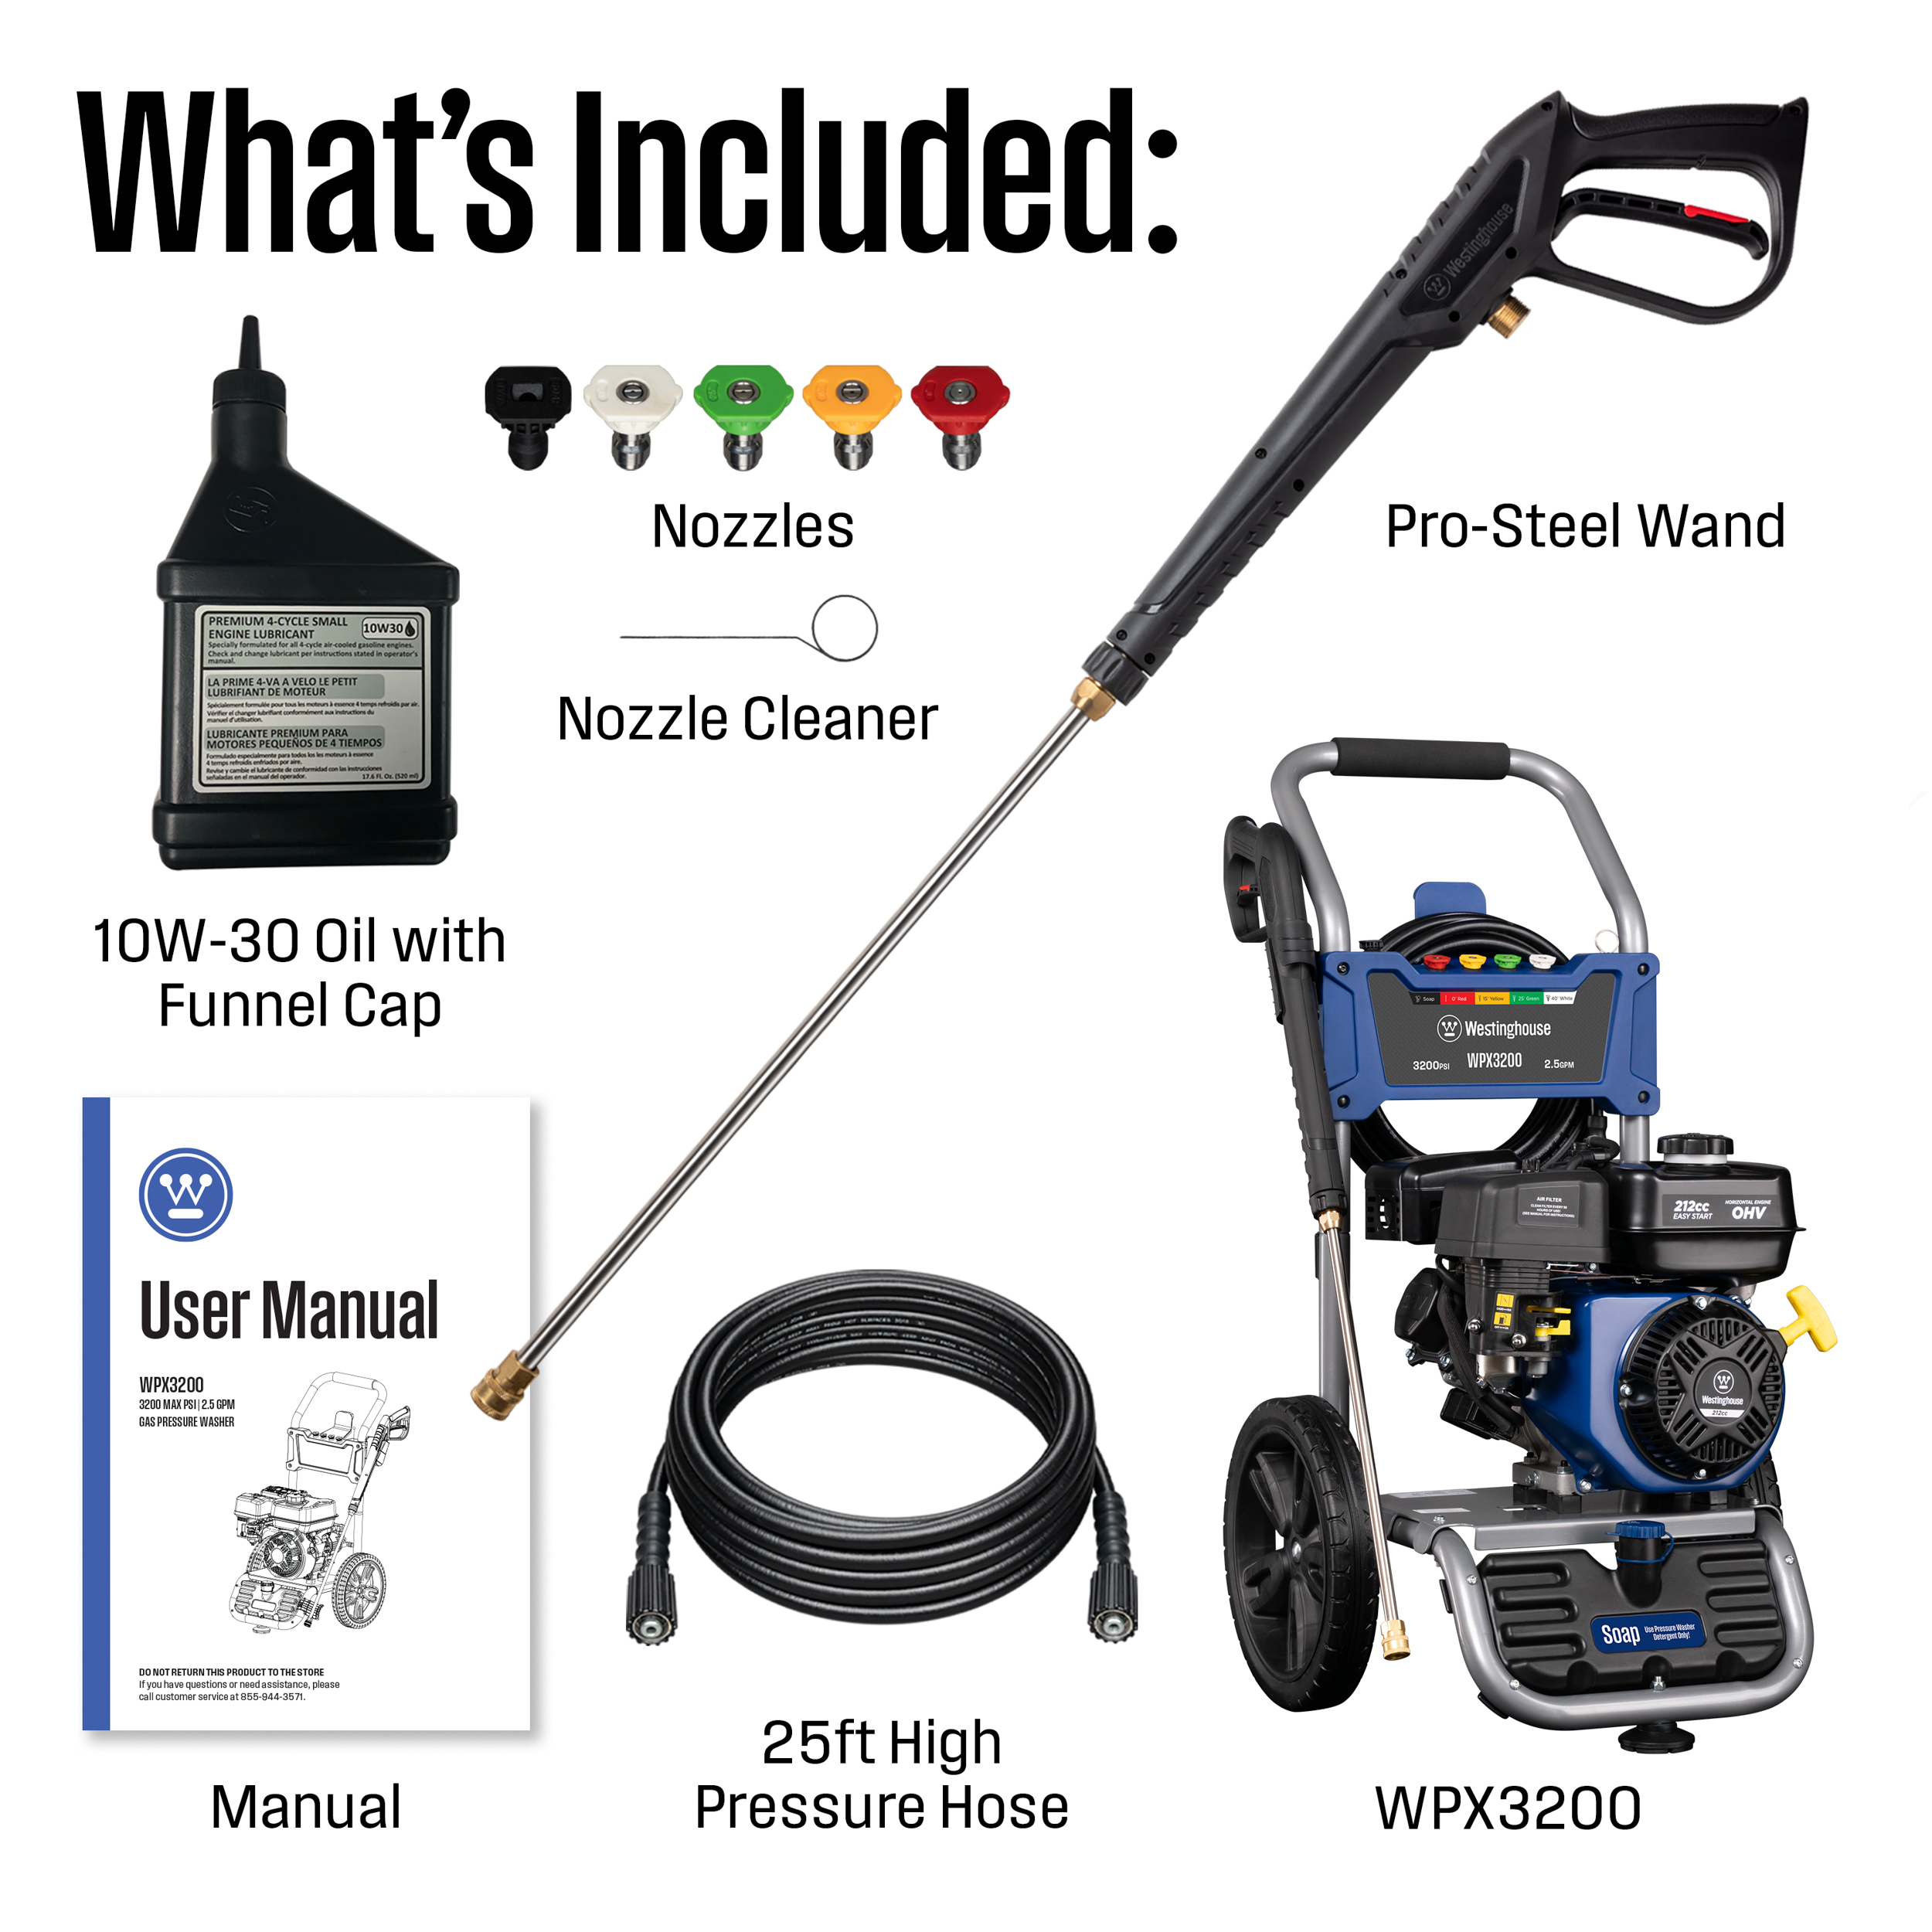 Westinghouse 3200-PSI, 2.5-GPM Gas Pressure Washer with 5 Nozzles & Soap Tank, 63 lbs. - image 8 of 13